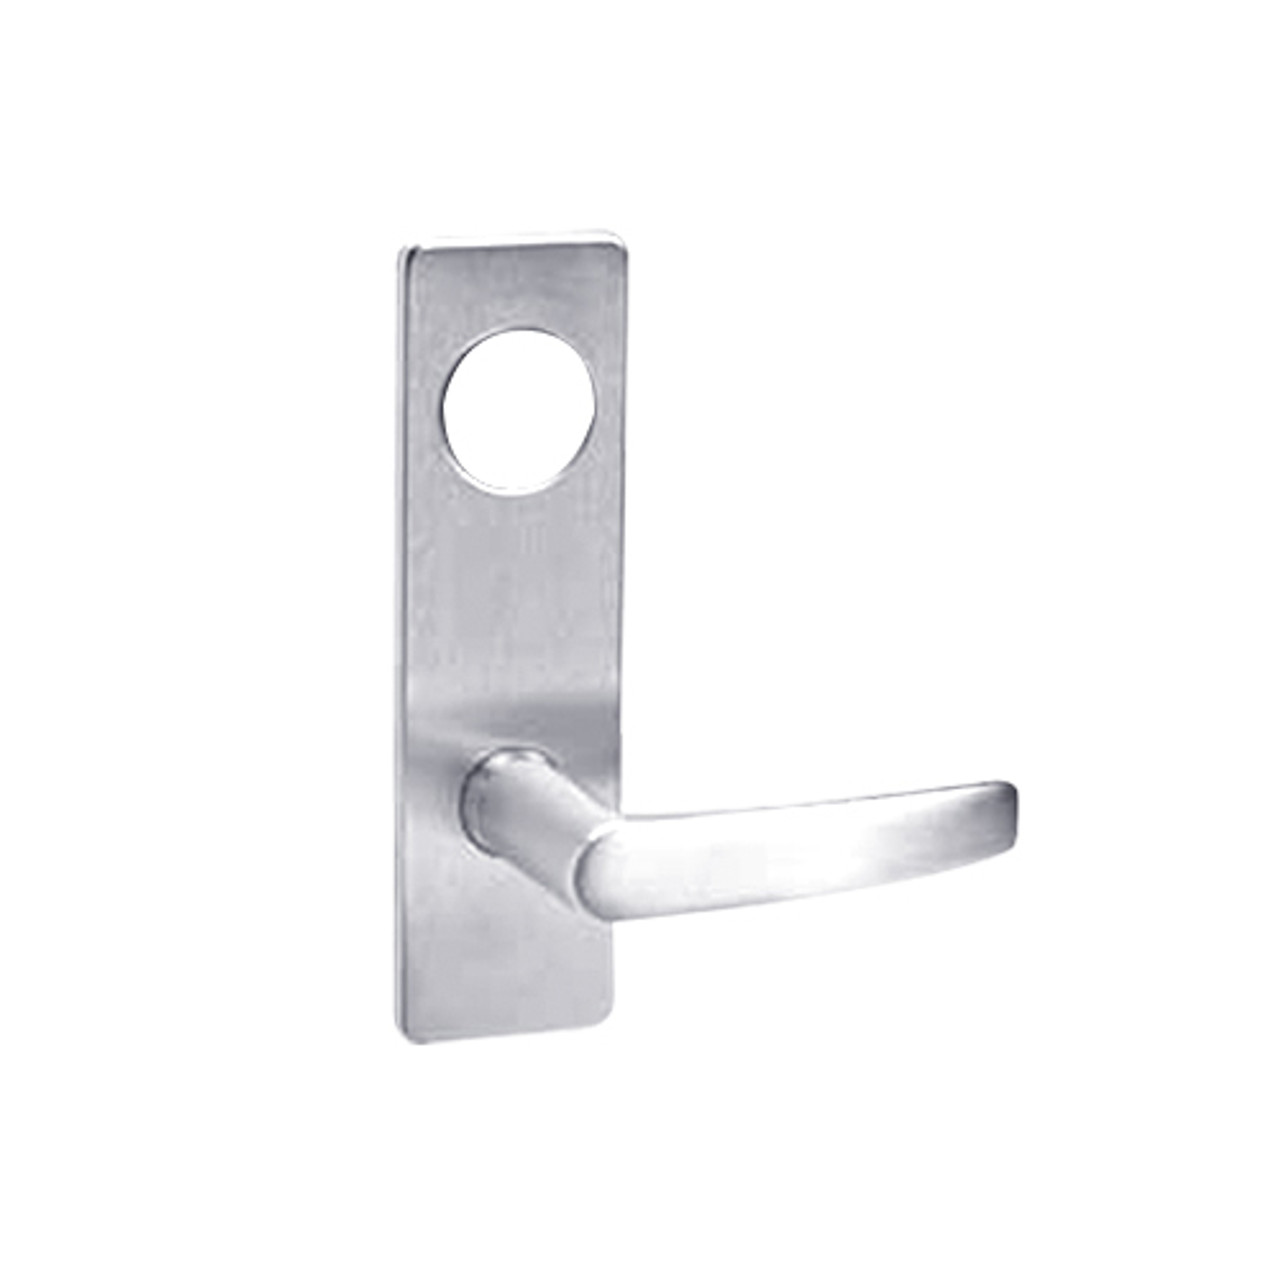 ML2022-ASP-625 Corbin Russwin ML2000 Series Mortise Store Door Locksets with Armstrong Lever with Deadbolt in Bright Chrome